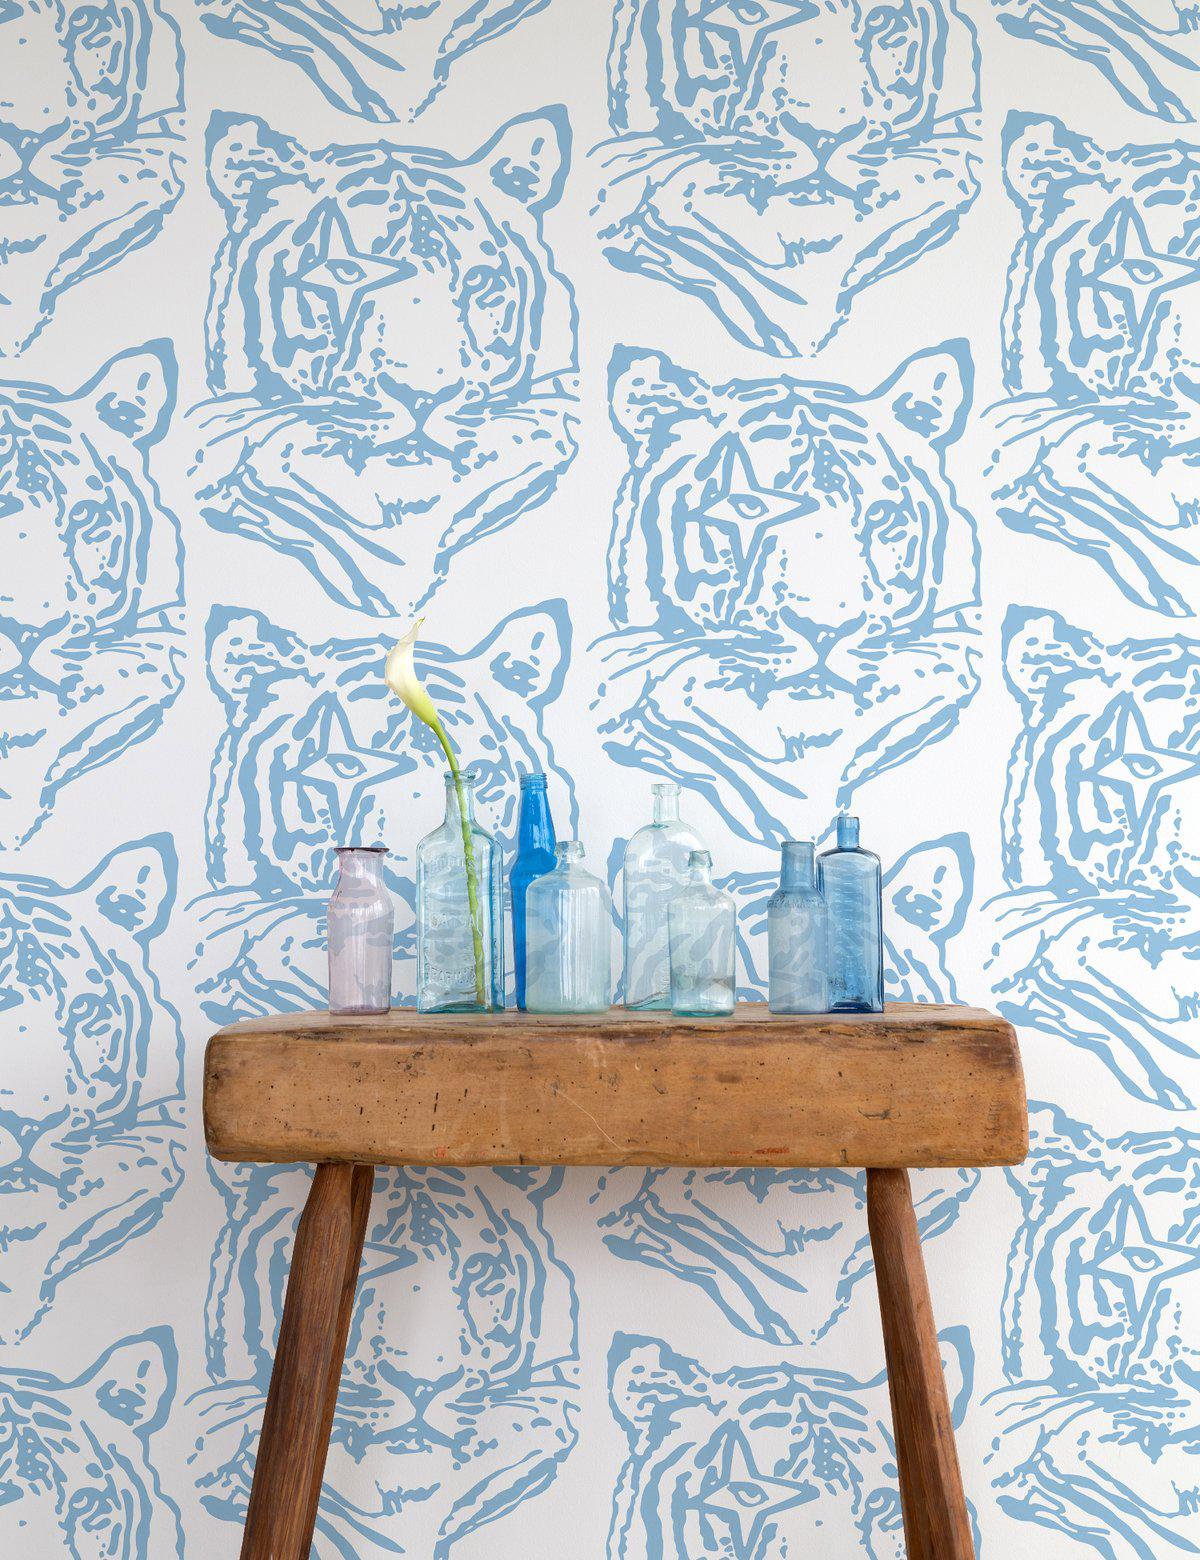 This beautiful star tiger wallpaper, a collaboration with Finnish designer Paola Suhonen of Ivana Helsinki, is the perfect décor for your home or business.
 
Samples are available for $18 including US shipping, please message us to purchase. 